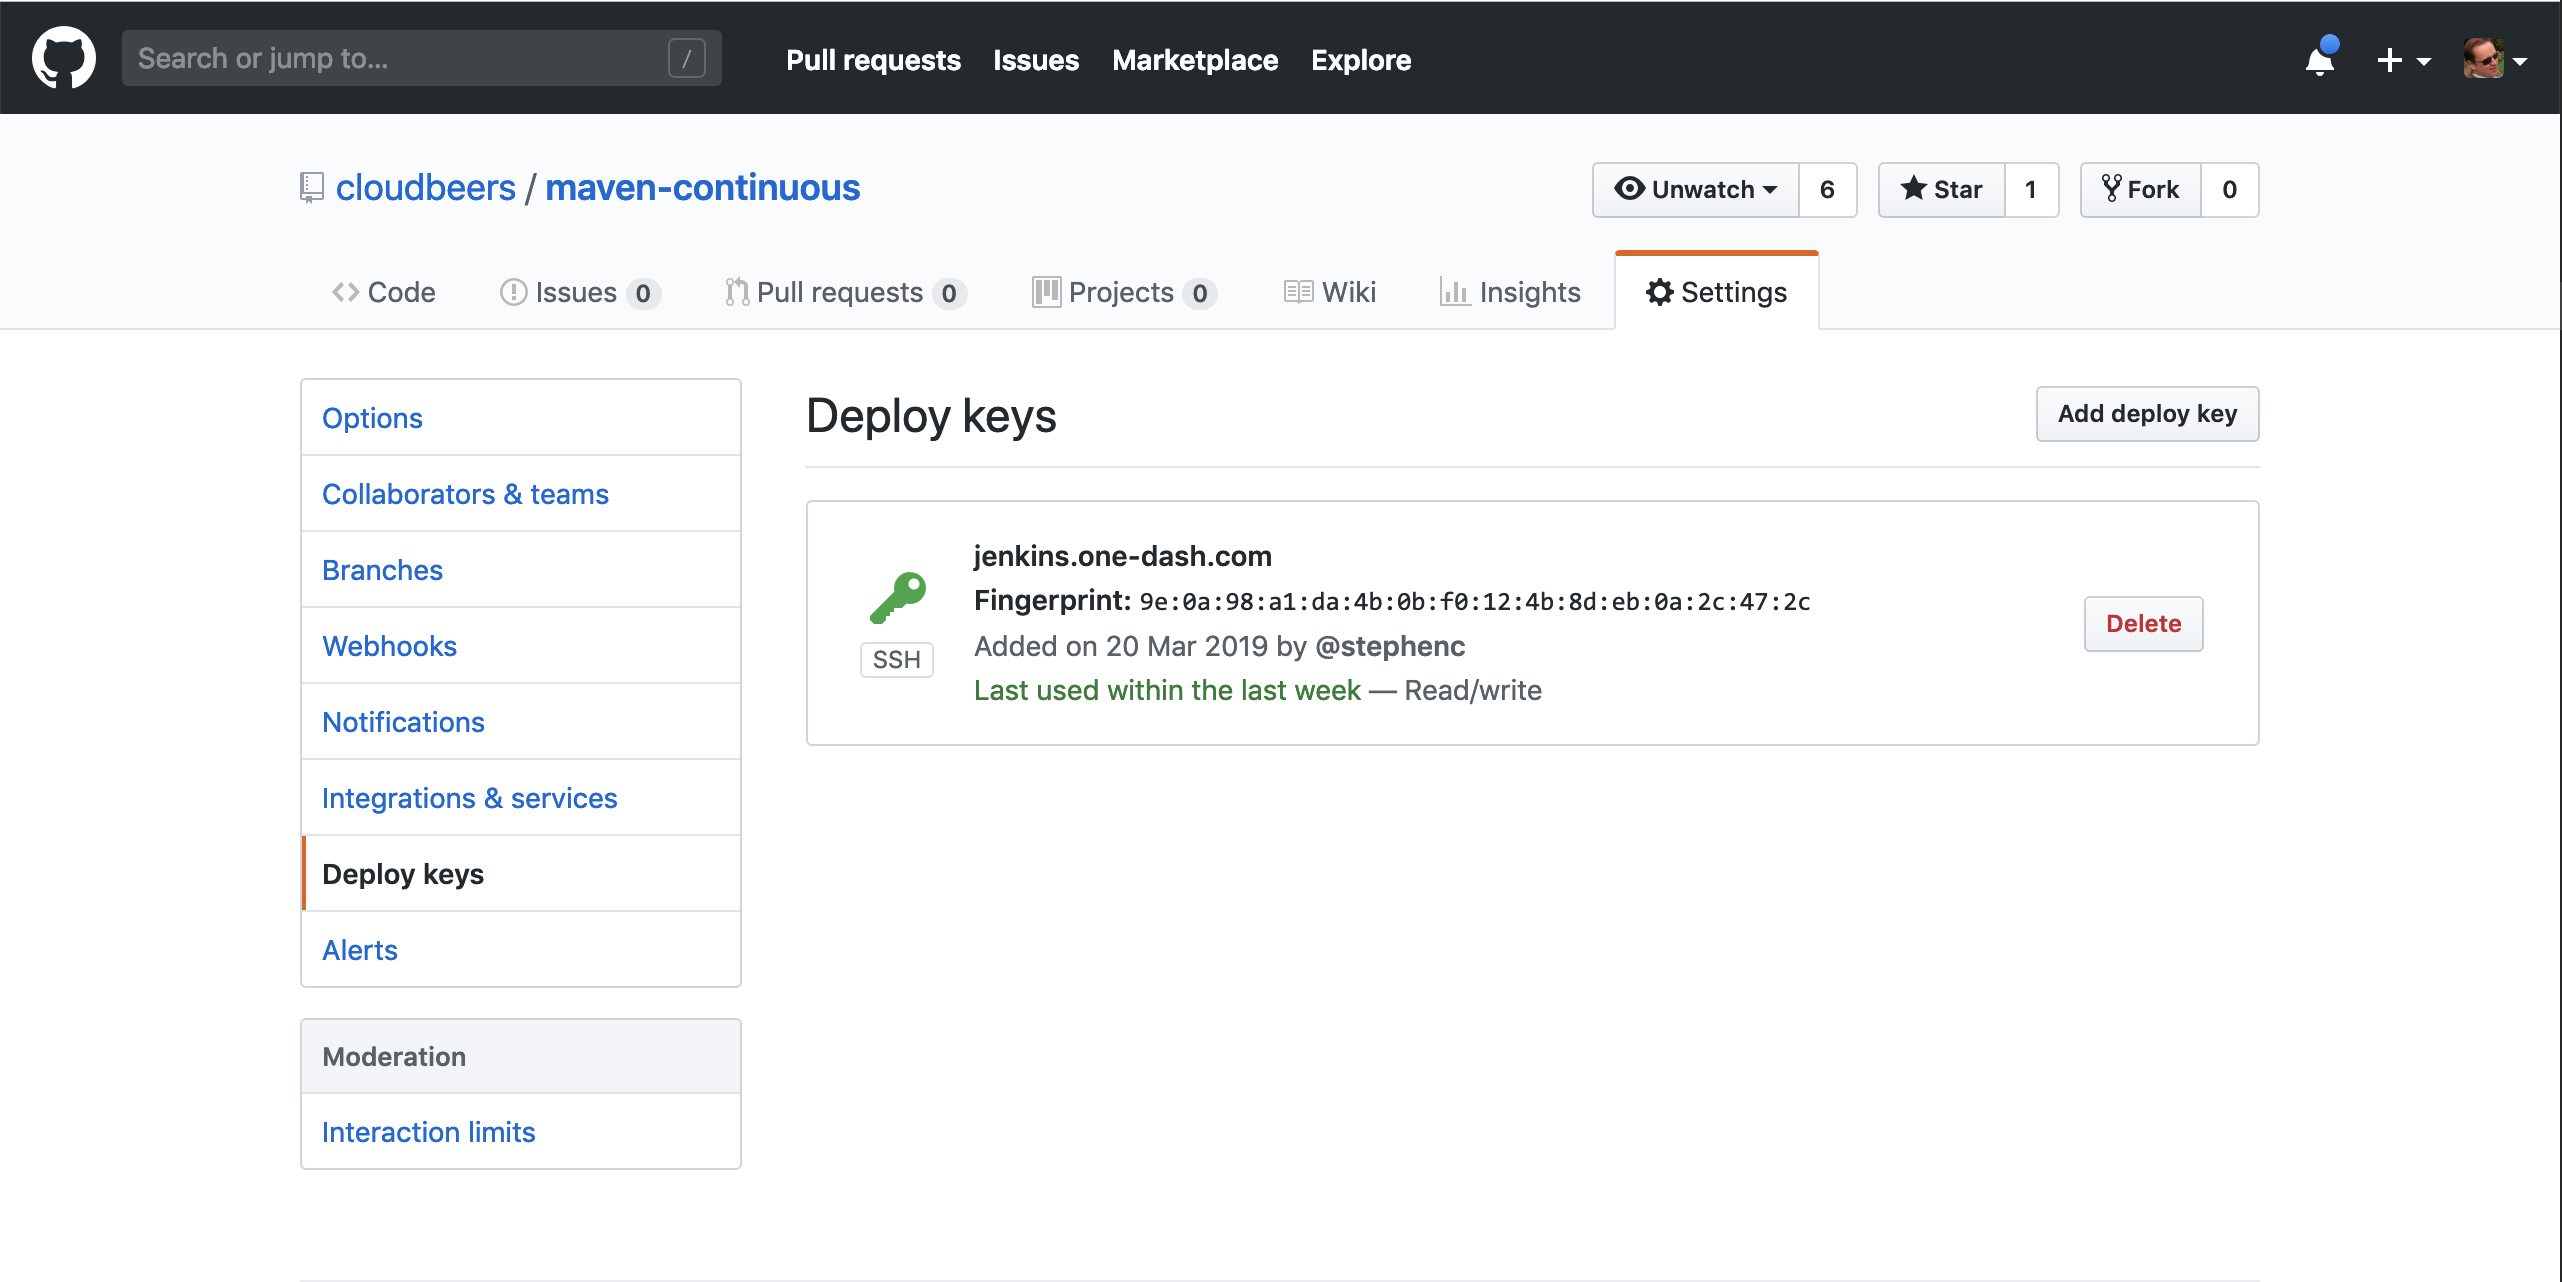 A deploy key configured in the GitHub repository